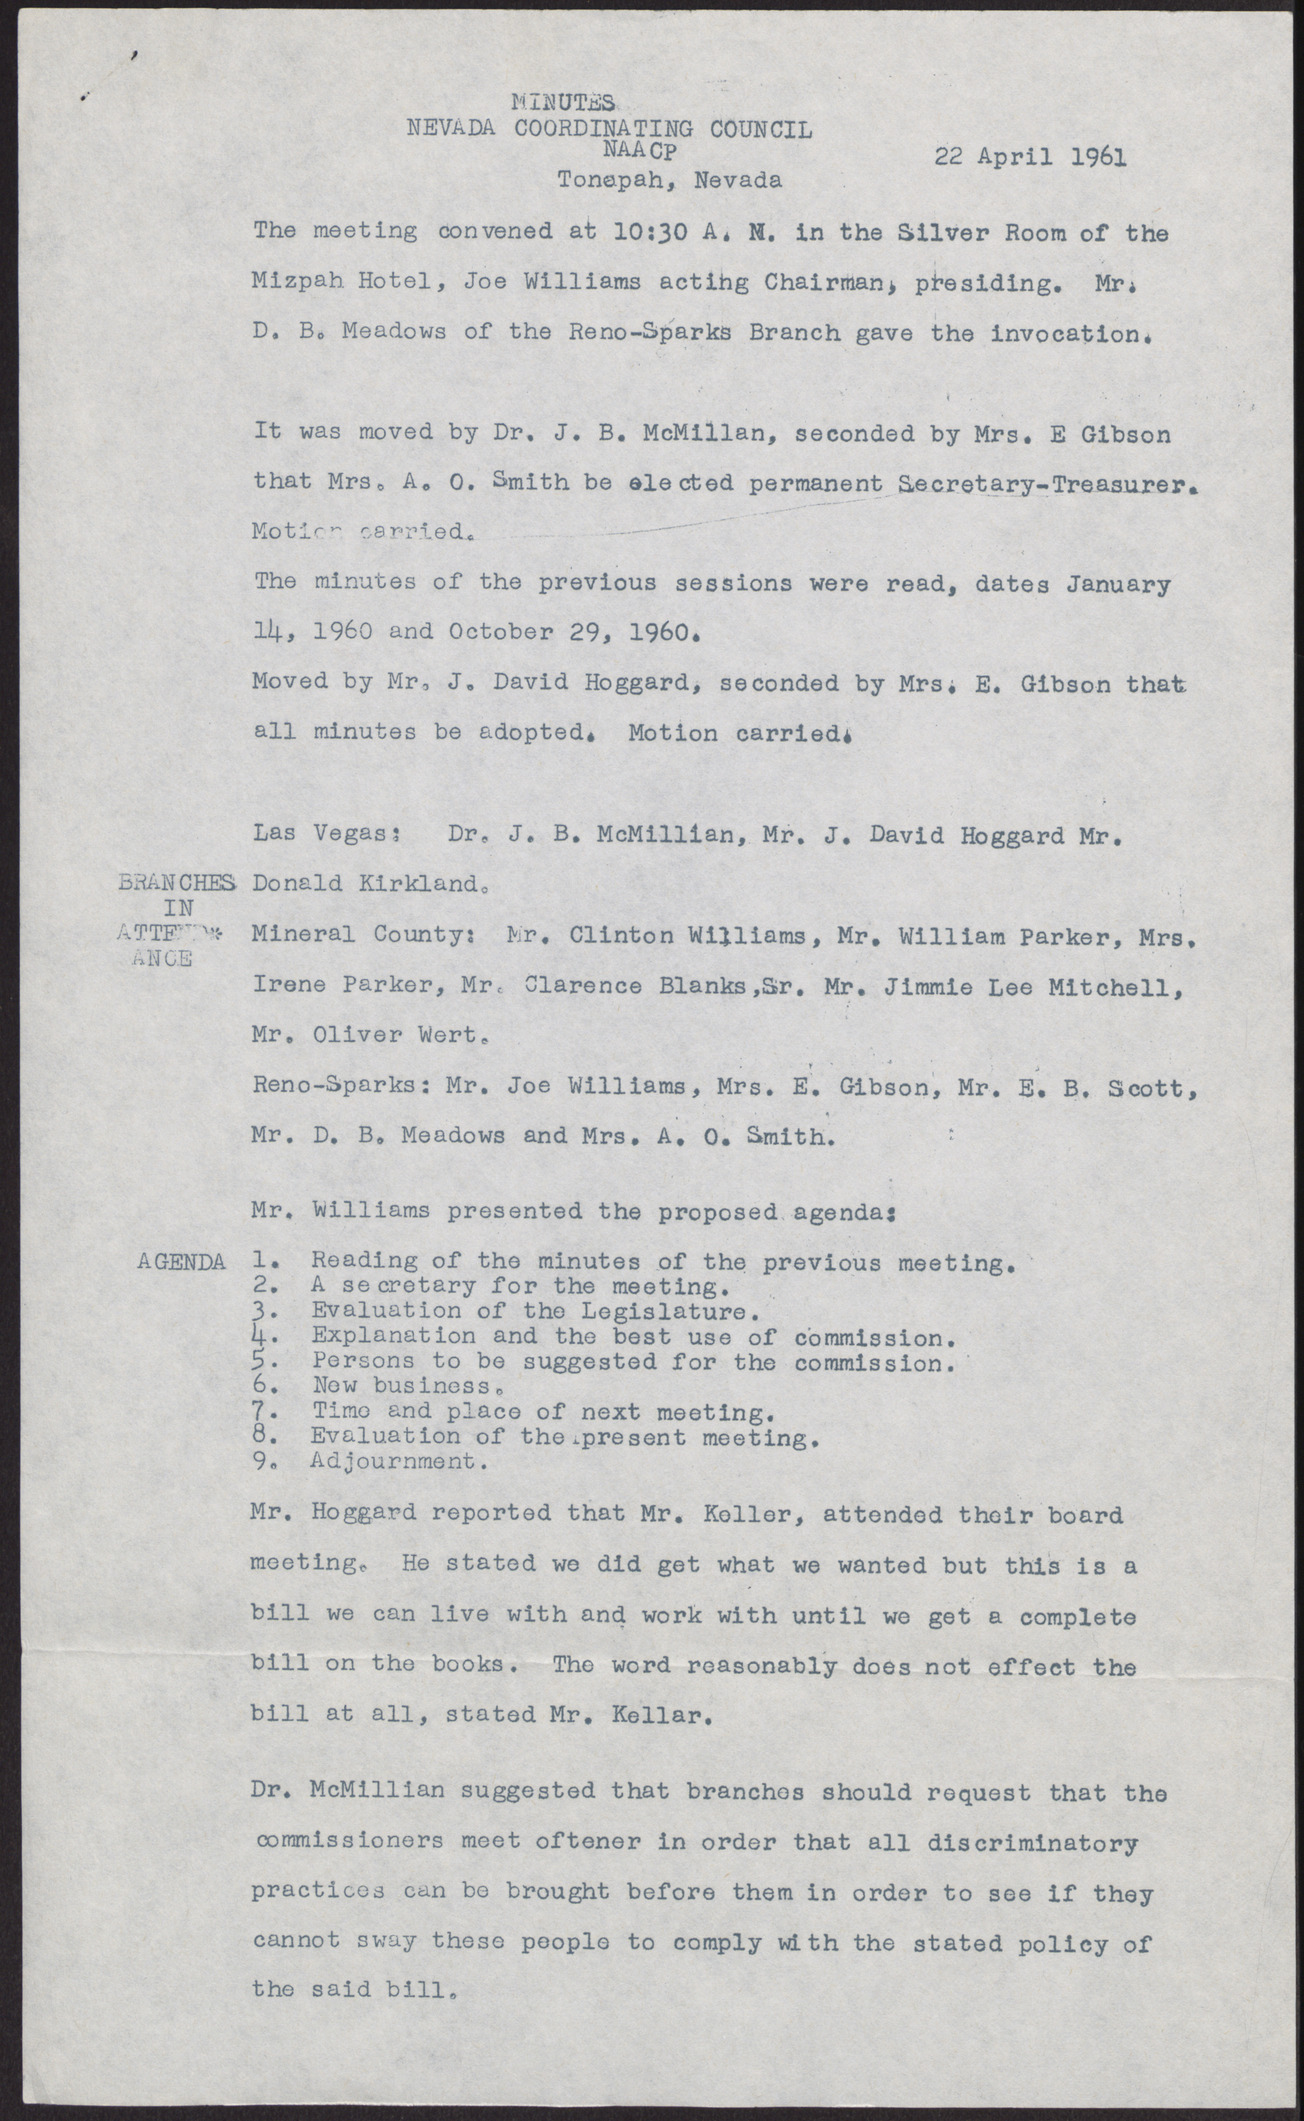 Minutes from the NAACP Nevada Coordinating Council meeting (3 pages), April 22, 1961